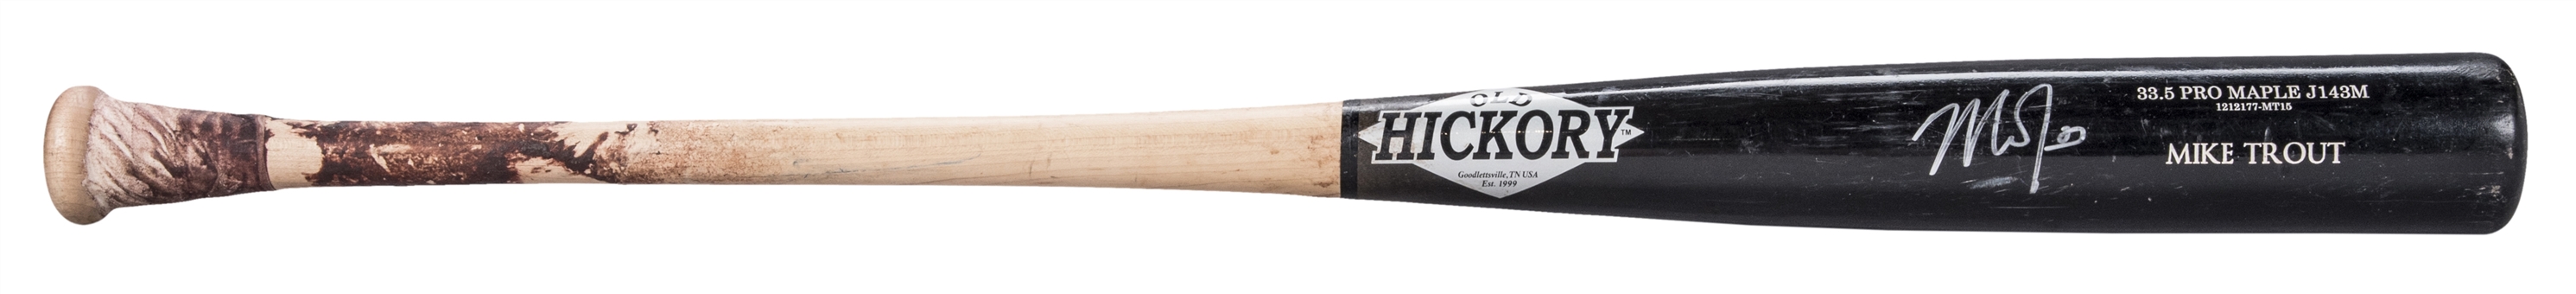 2012 Mike Trout Game Used and Signed Old Hickory J143M Model Bat Used in 2013 Season (PSA/DNA GU 9.5)